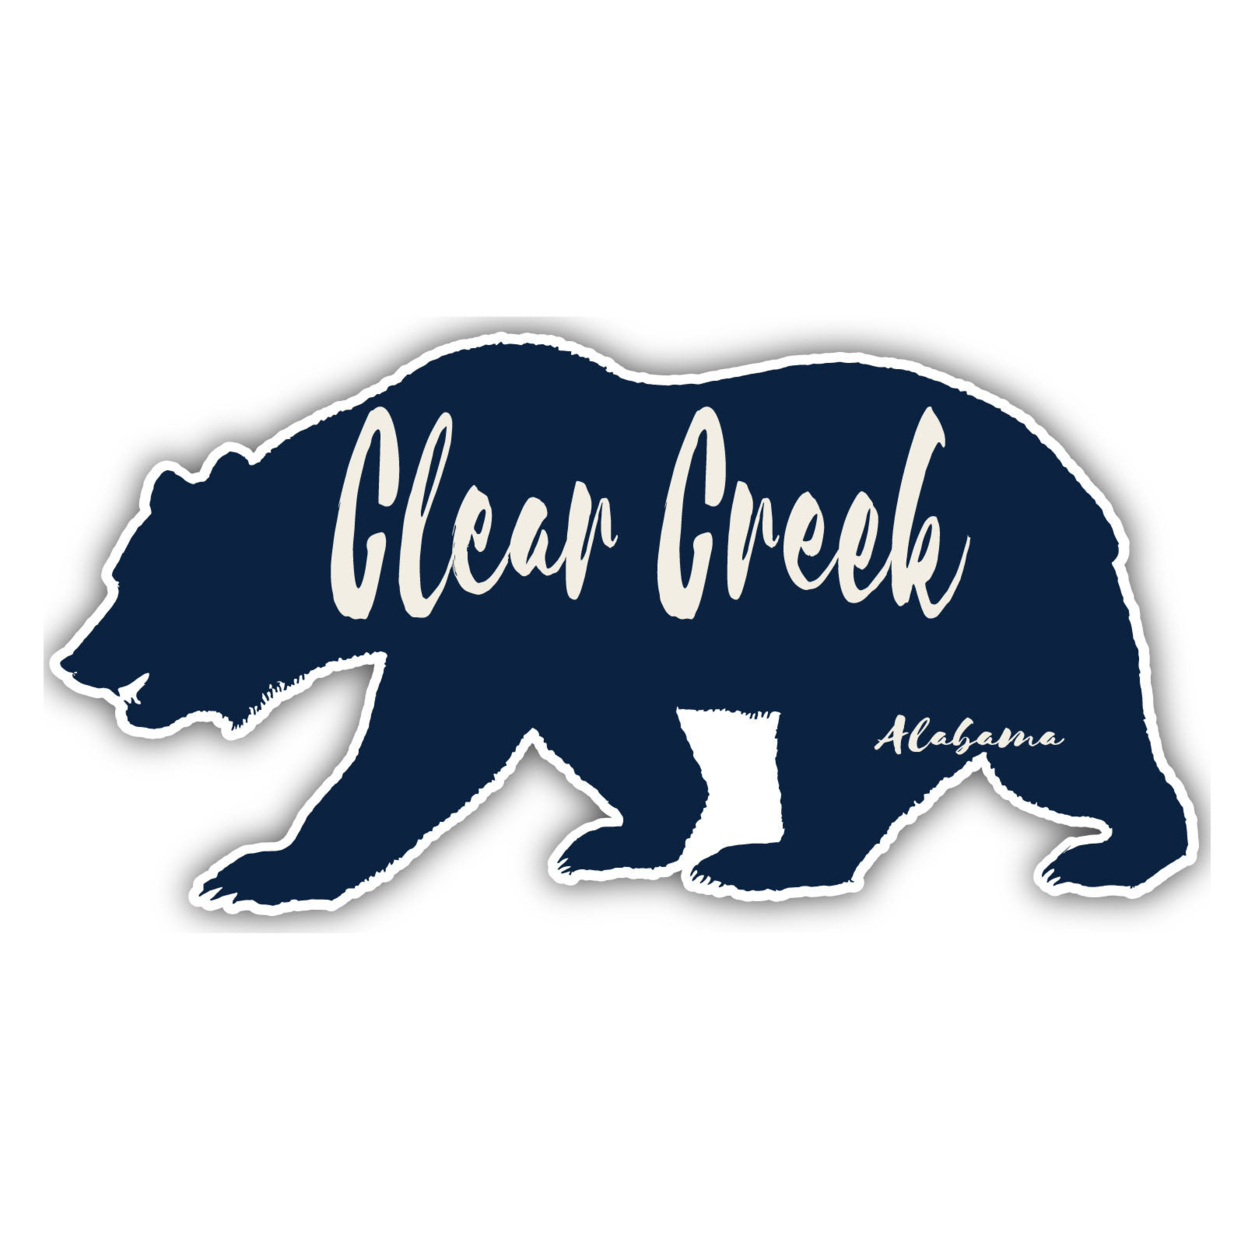 Clear Creek Alabama Souvenir Decorative Stickers (Choose Theme And Size) - 4-Pack, 4-Inch, Tent